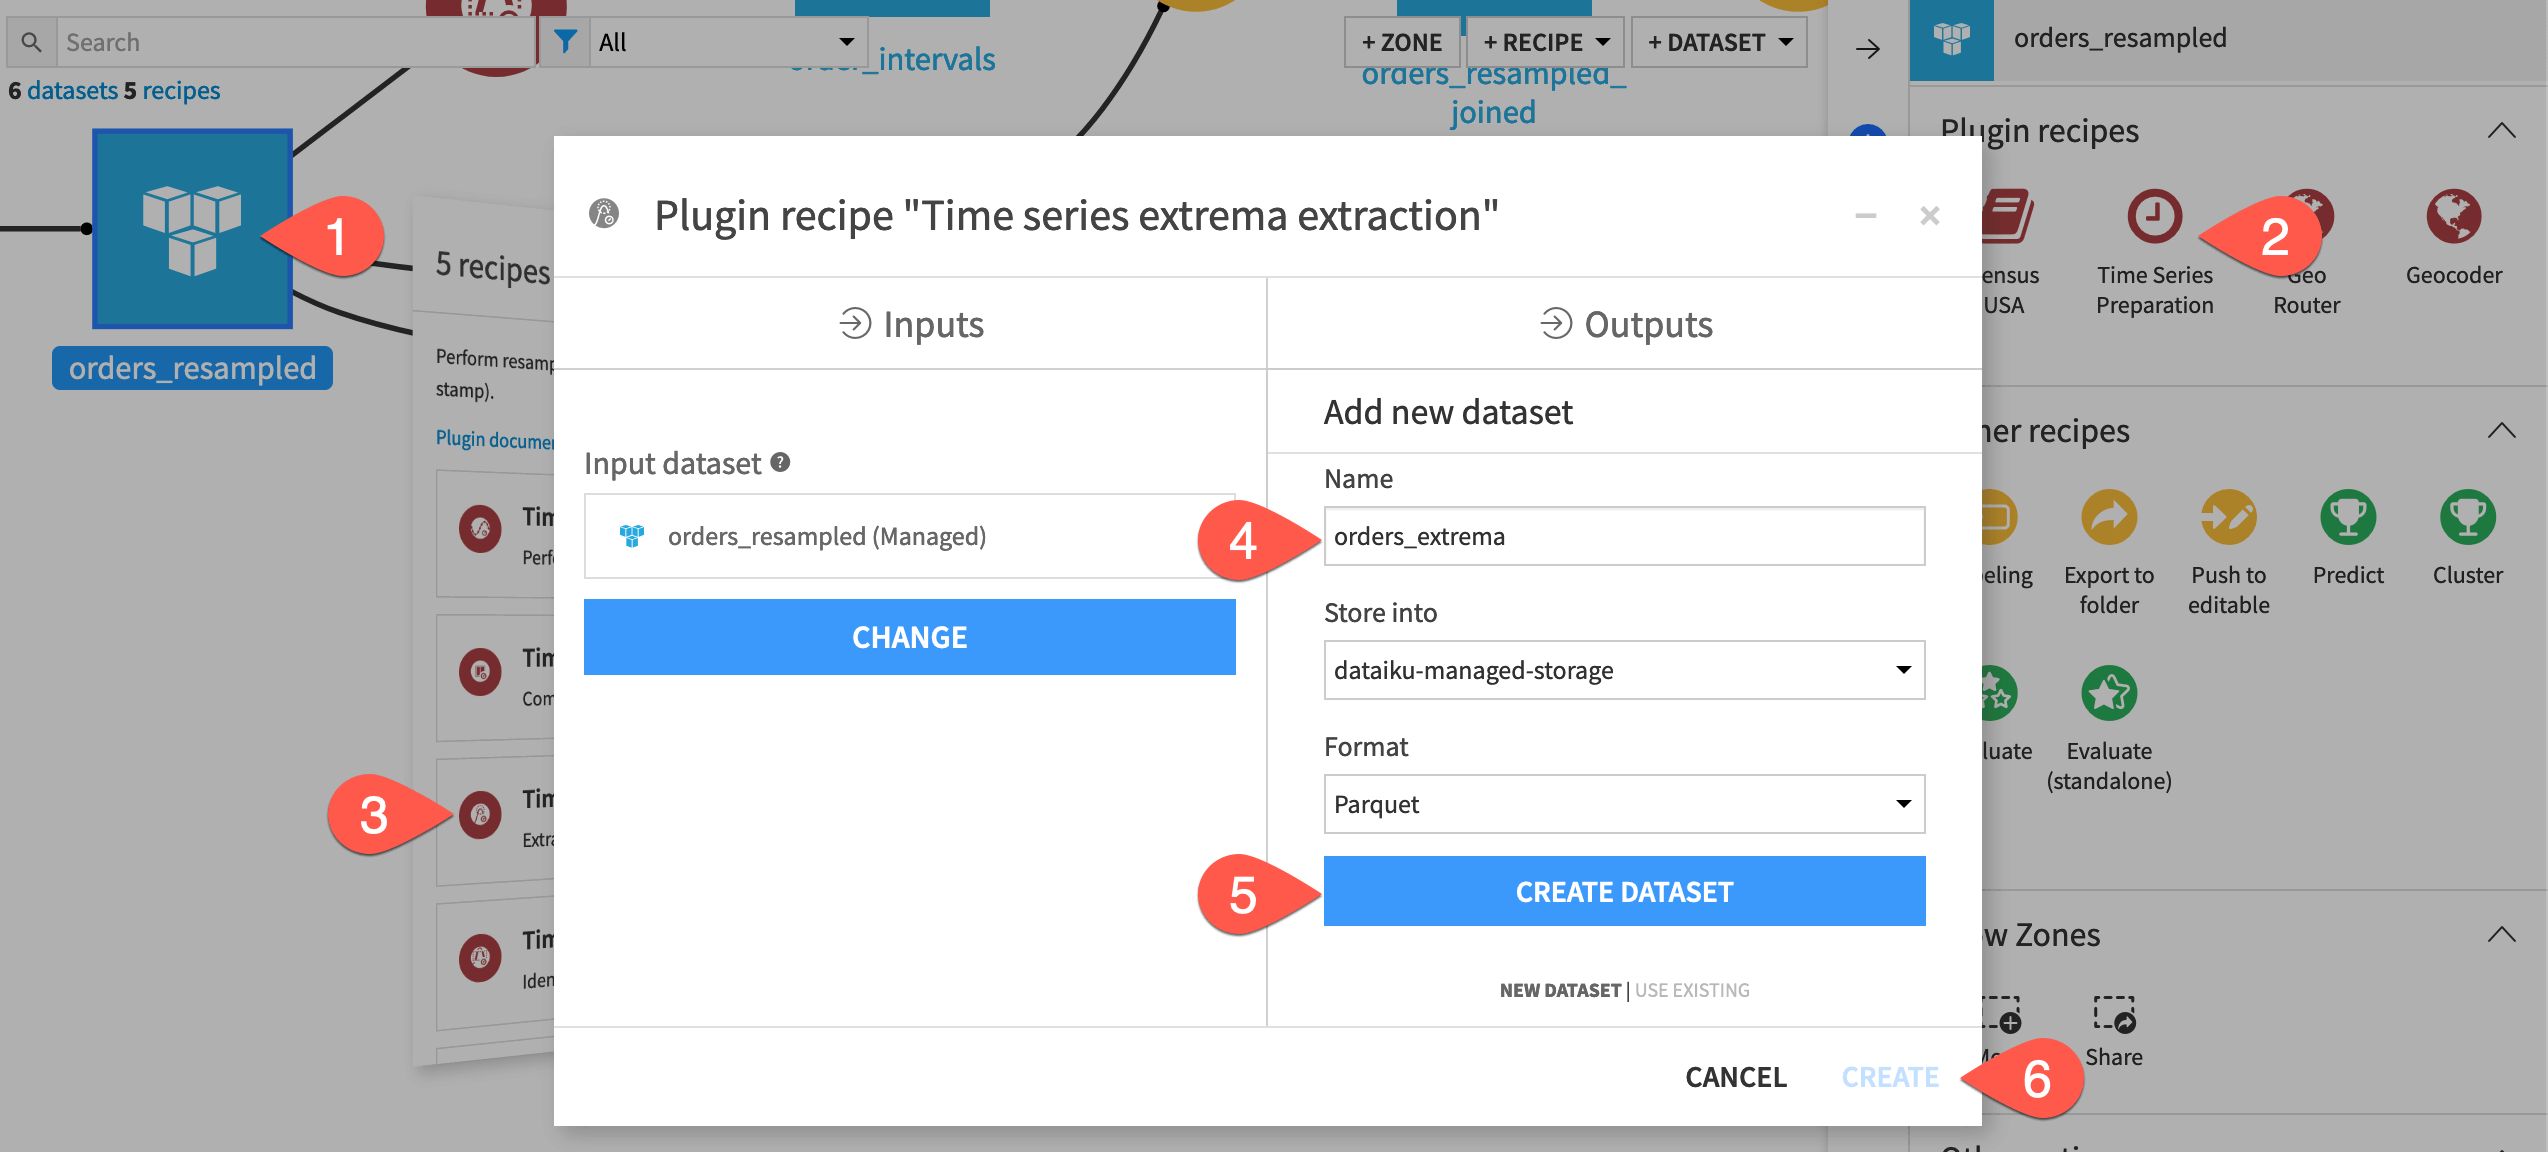 Dataiku screenshot of the dialog for creating a time series extrema extraction recipe.